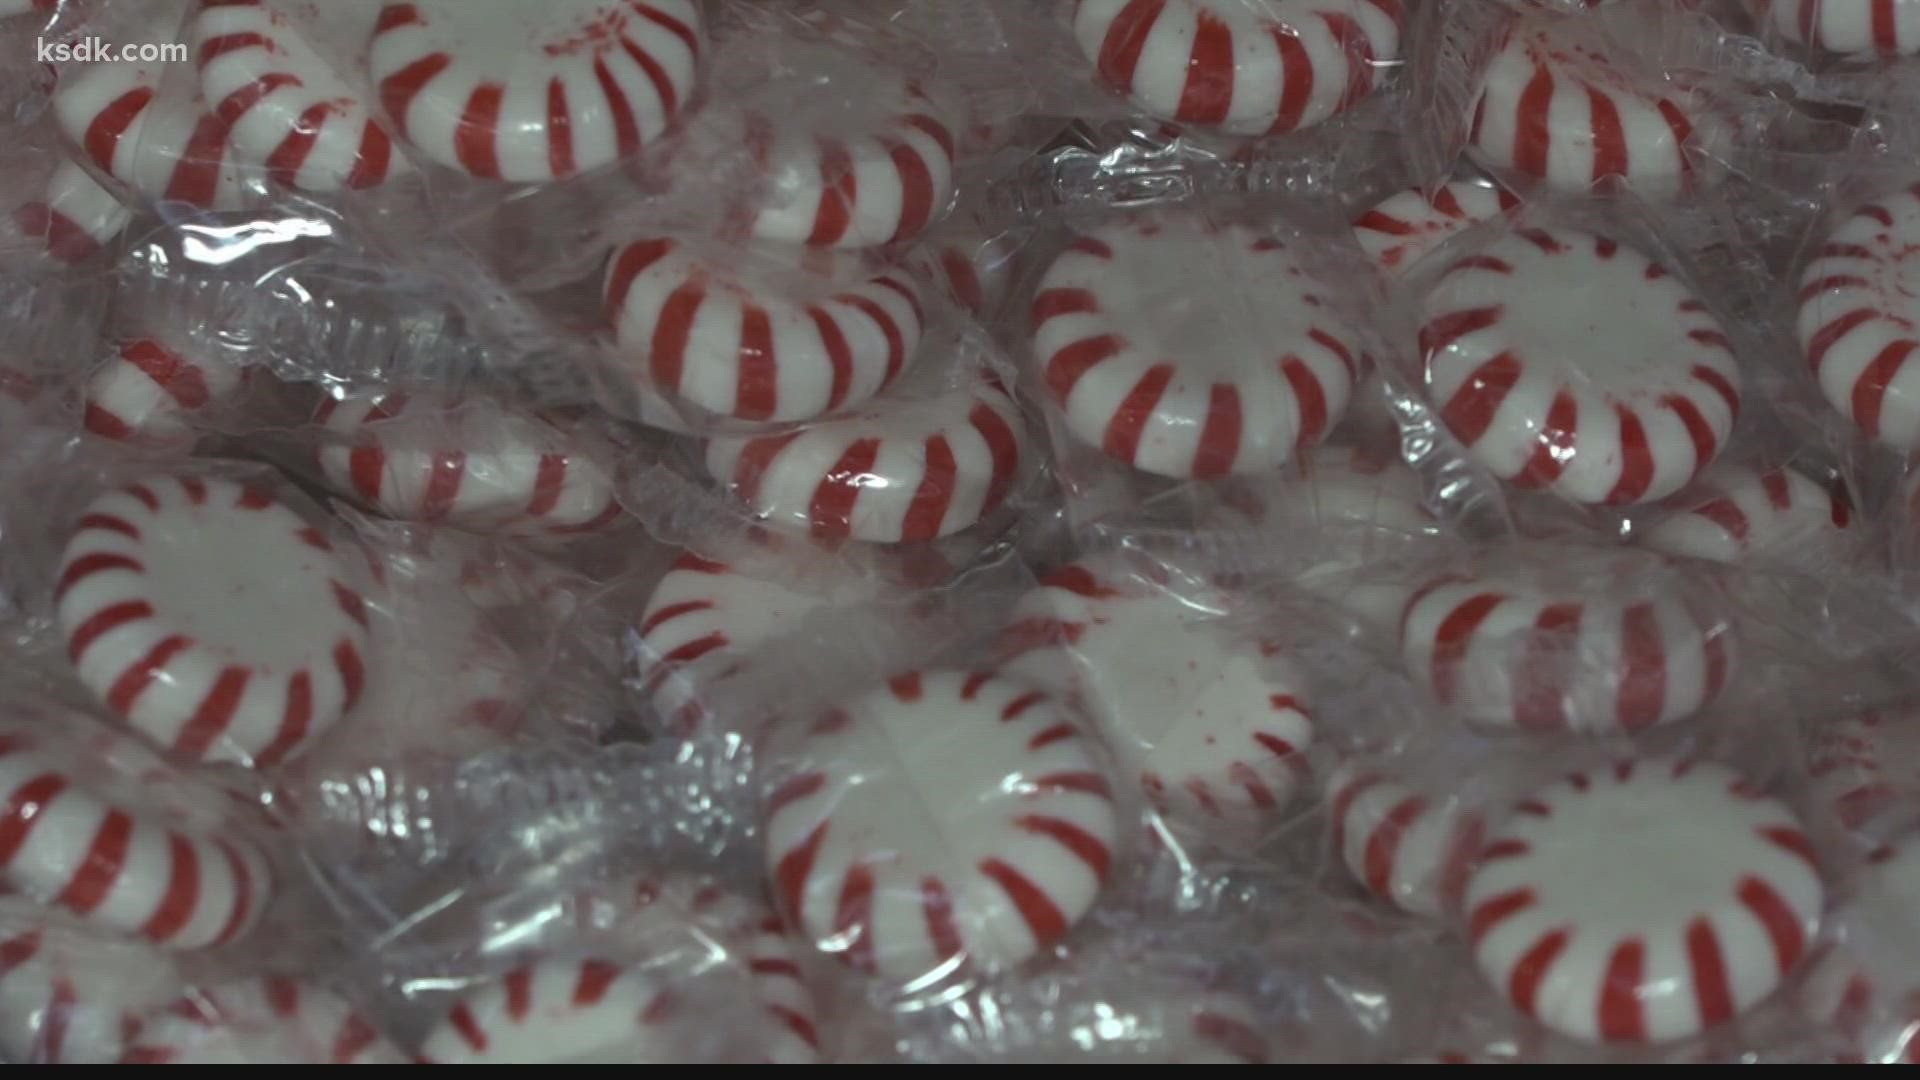 It turns out, the fresh flavoring and candies—like candy canes—are another example of items that could be more difficult to find in 2021.